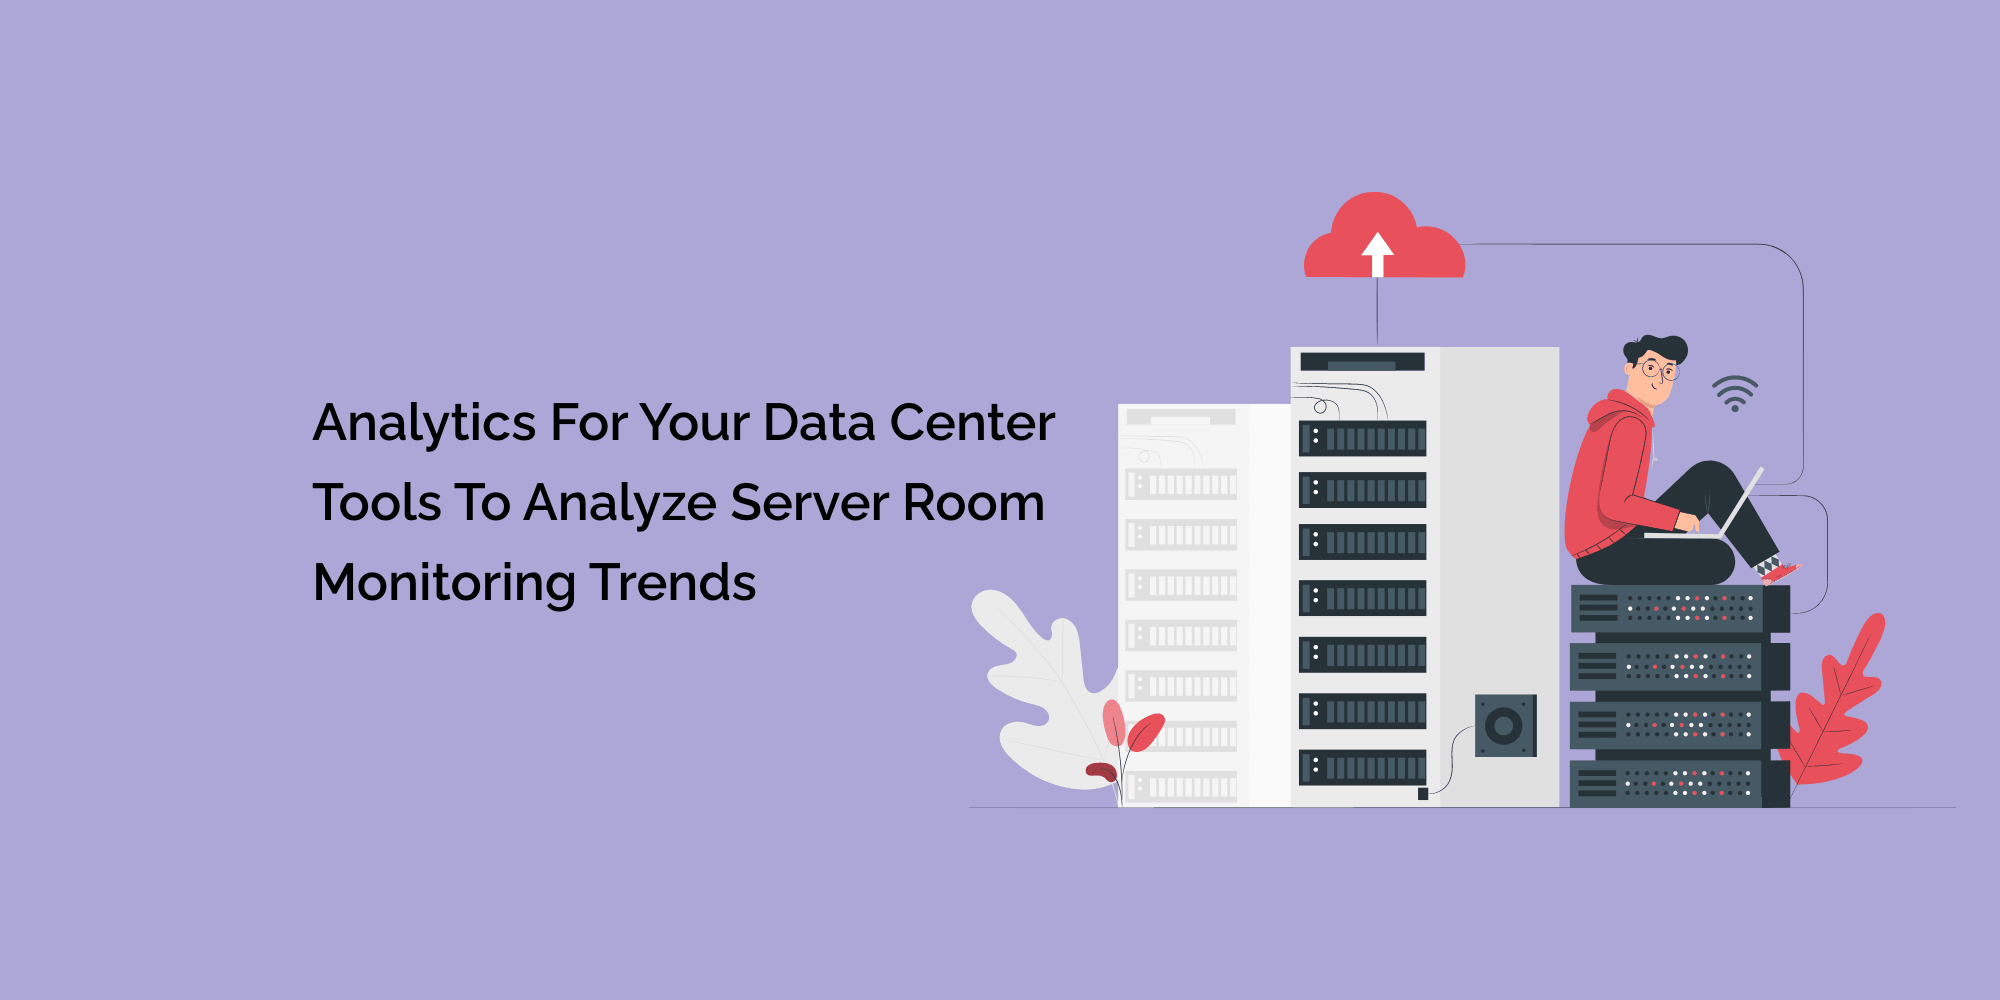 Analytics For Your Data Center:Tools to Analyze Server Room Monitoring Trends